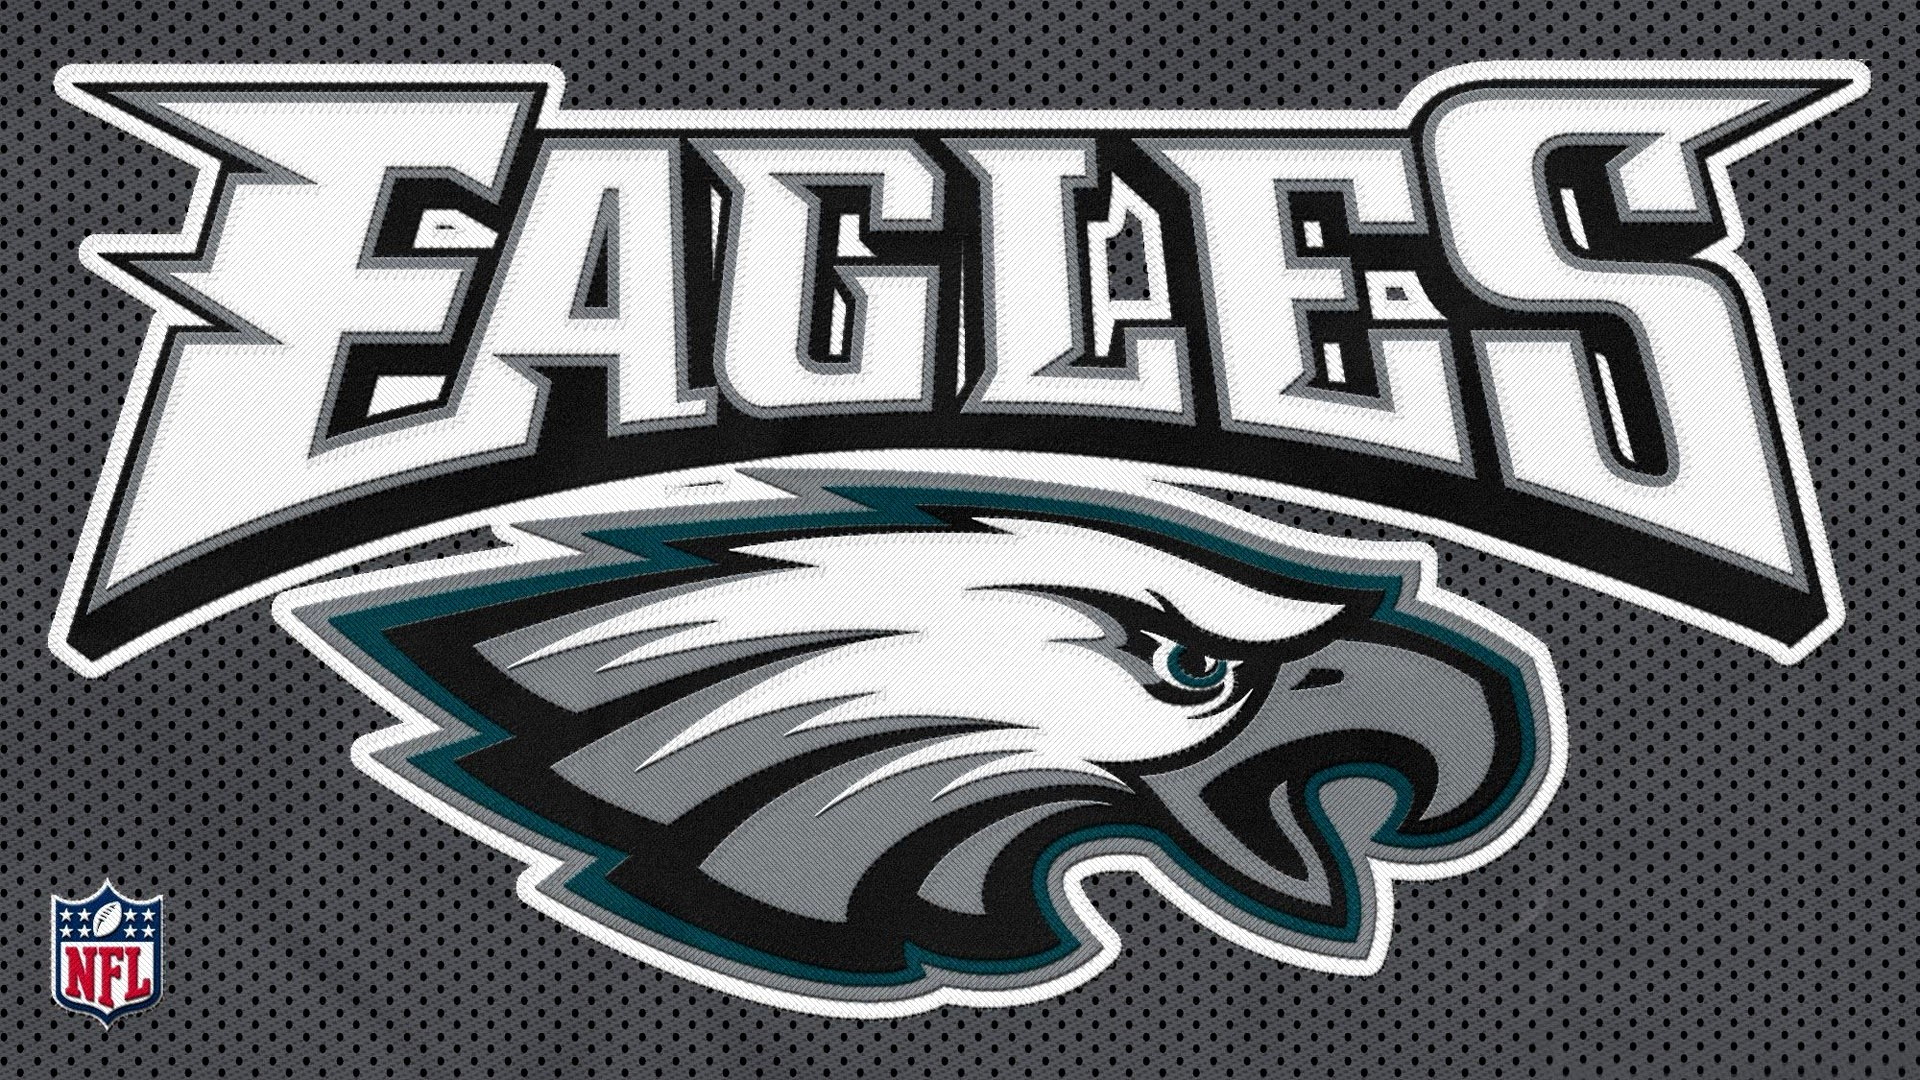 Best Philadelphia Eagles Wallpaper with high-resolution 1920x1080 pixel. You can use and set as wallpaper for Notebook Screensavers, Mac Wallpapers, Mobile Home Screen, iPhone or Android Phones Lock Screen